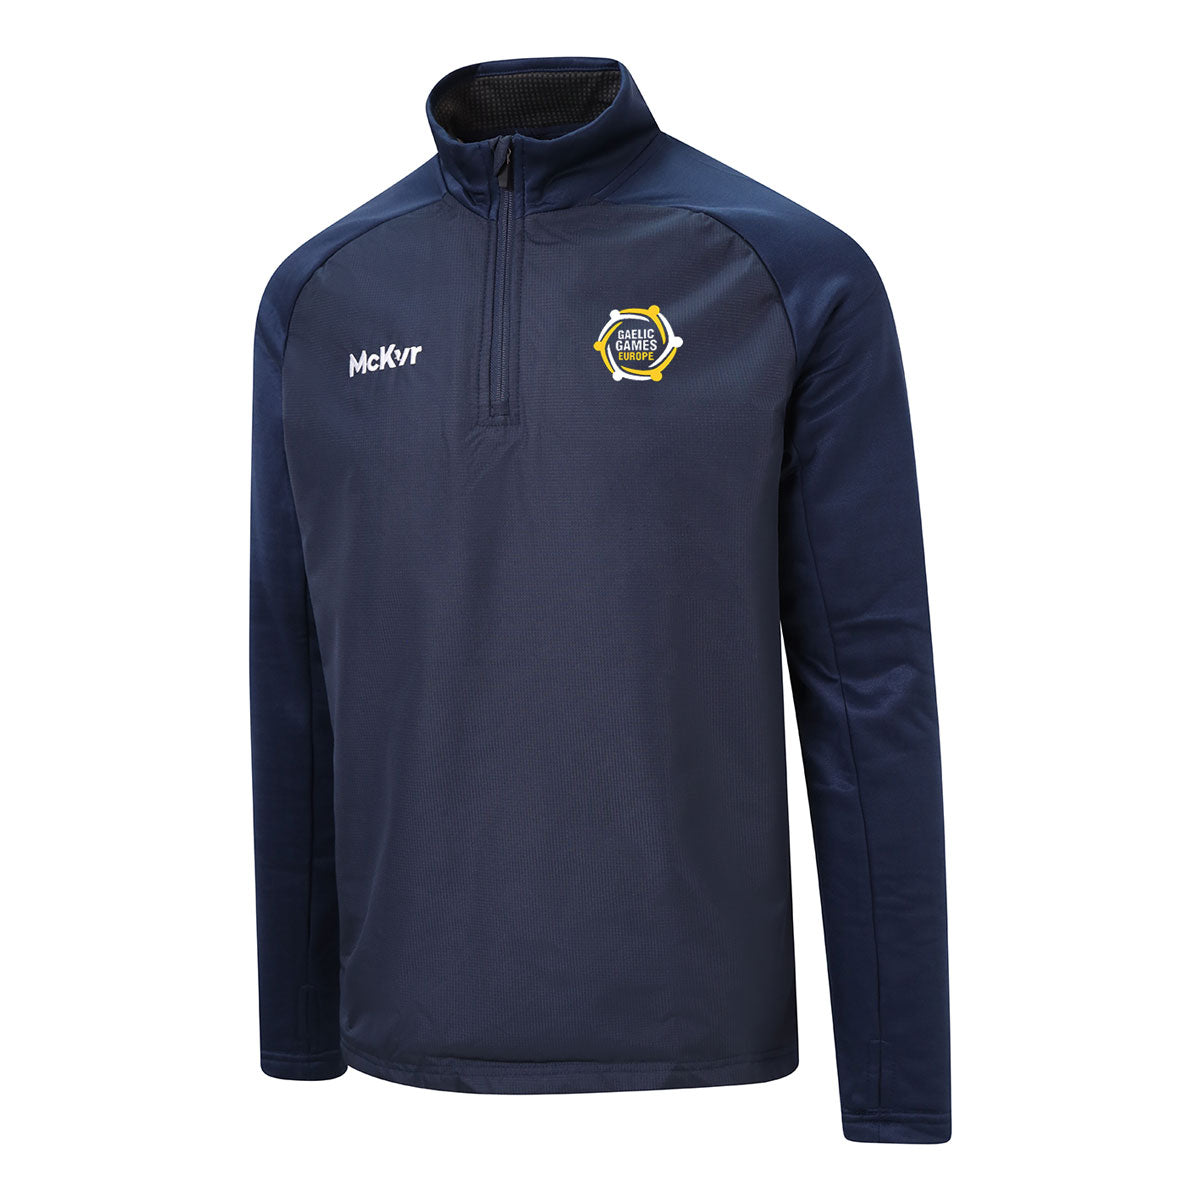 Mc Keever Gaelic Games Europe Core 22 Warm Top - Youth - Navy